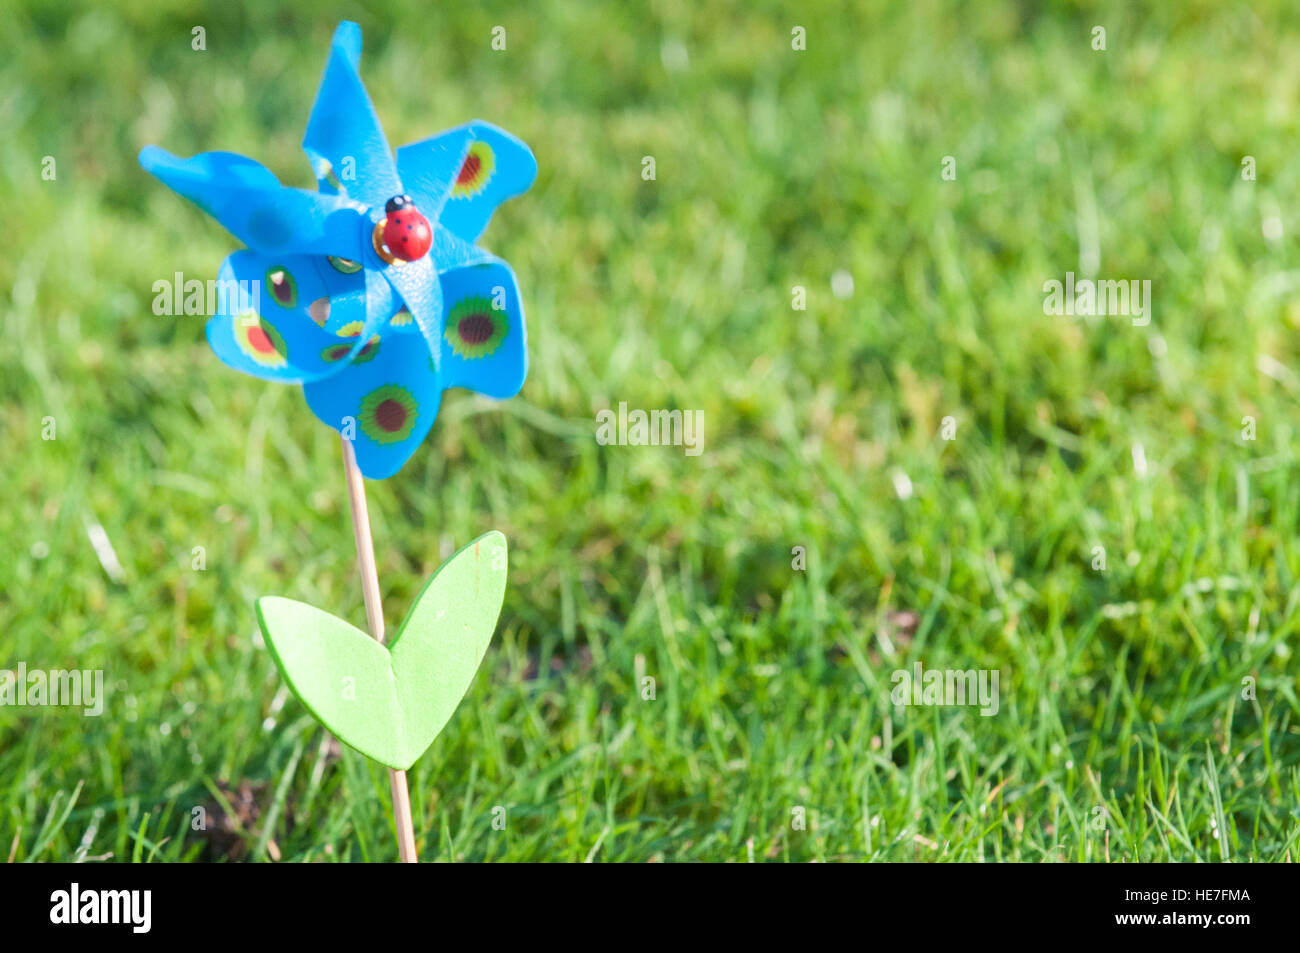 Simple child's toy on white background representing simplicity Stock Photo